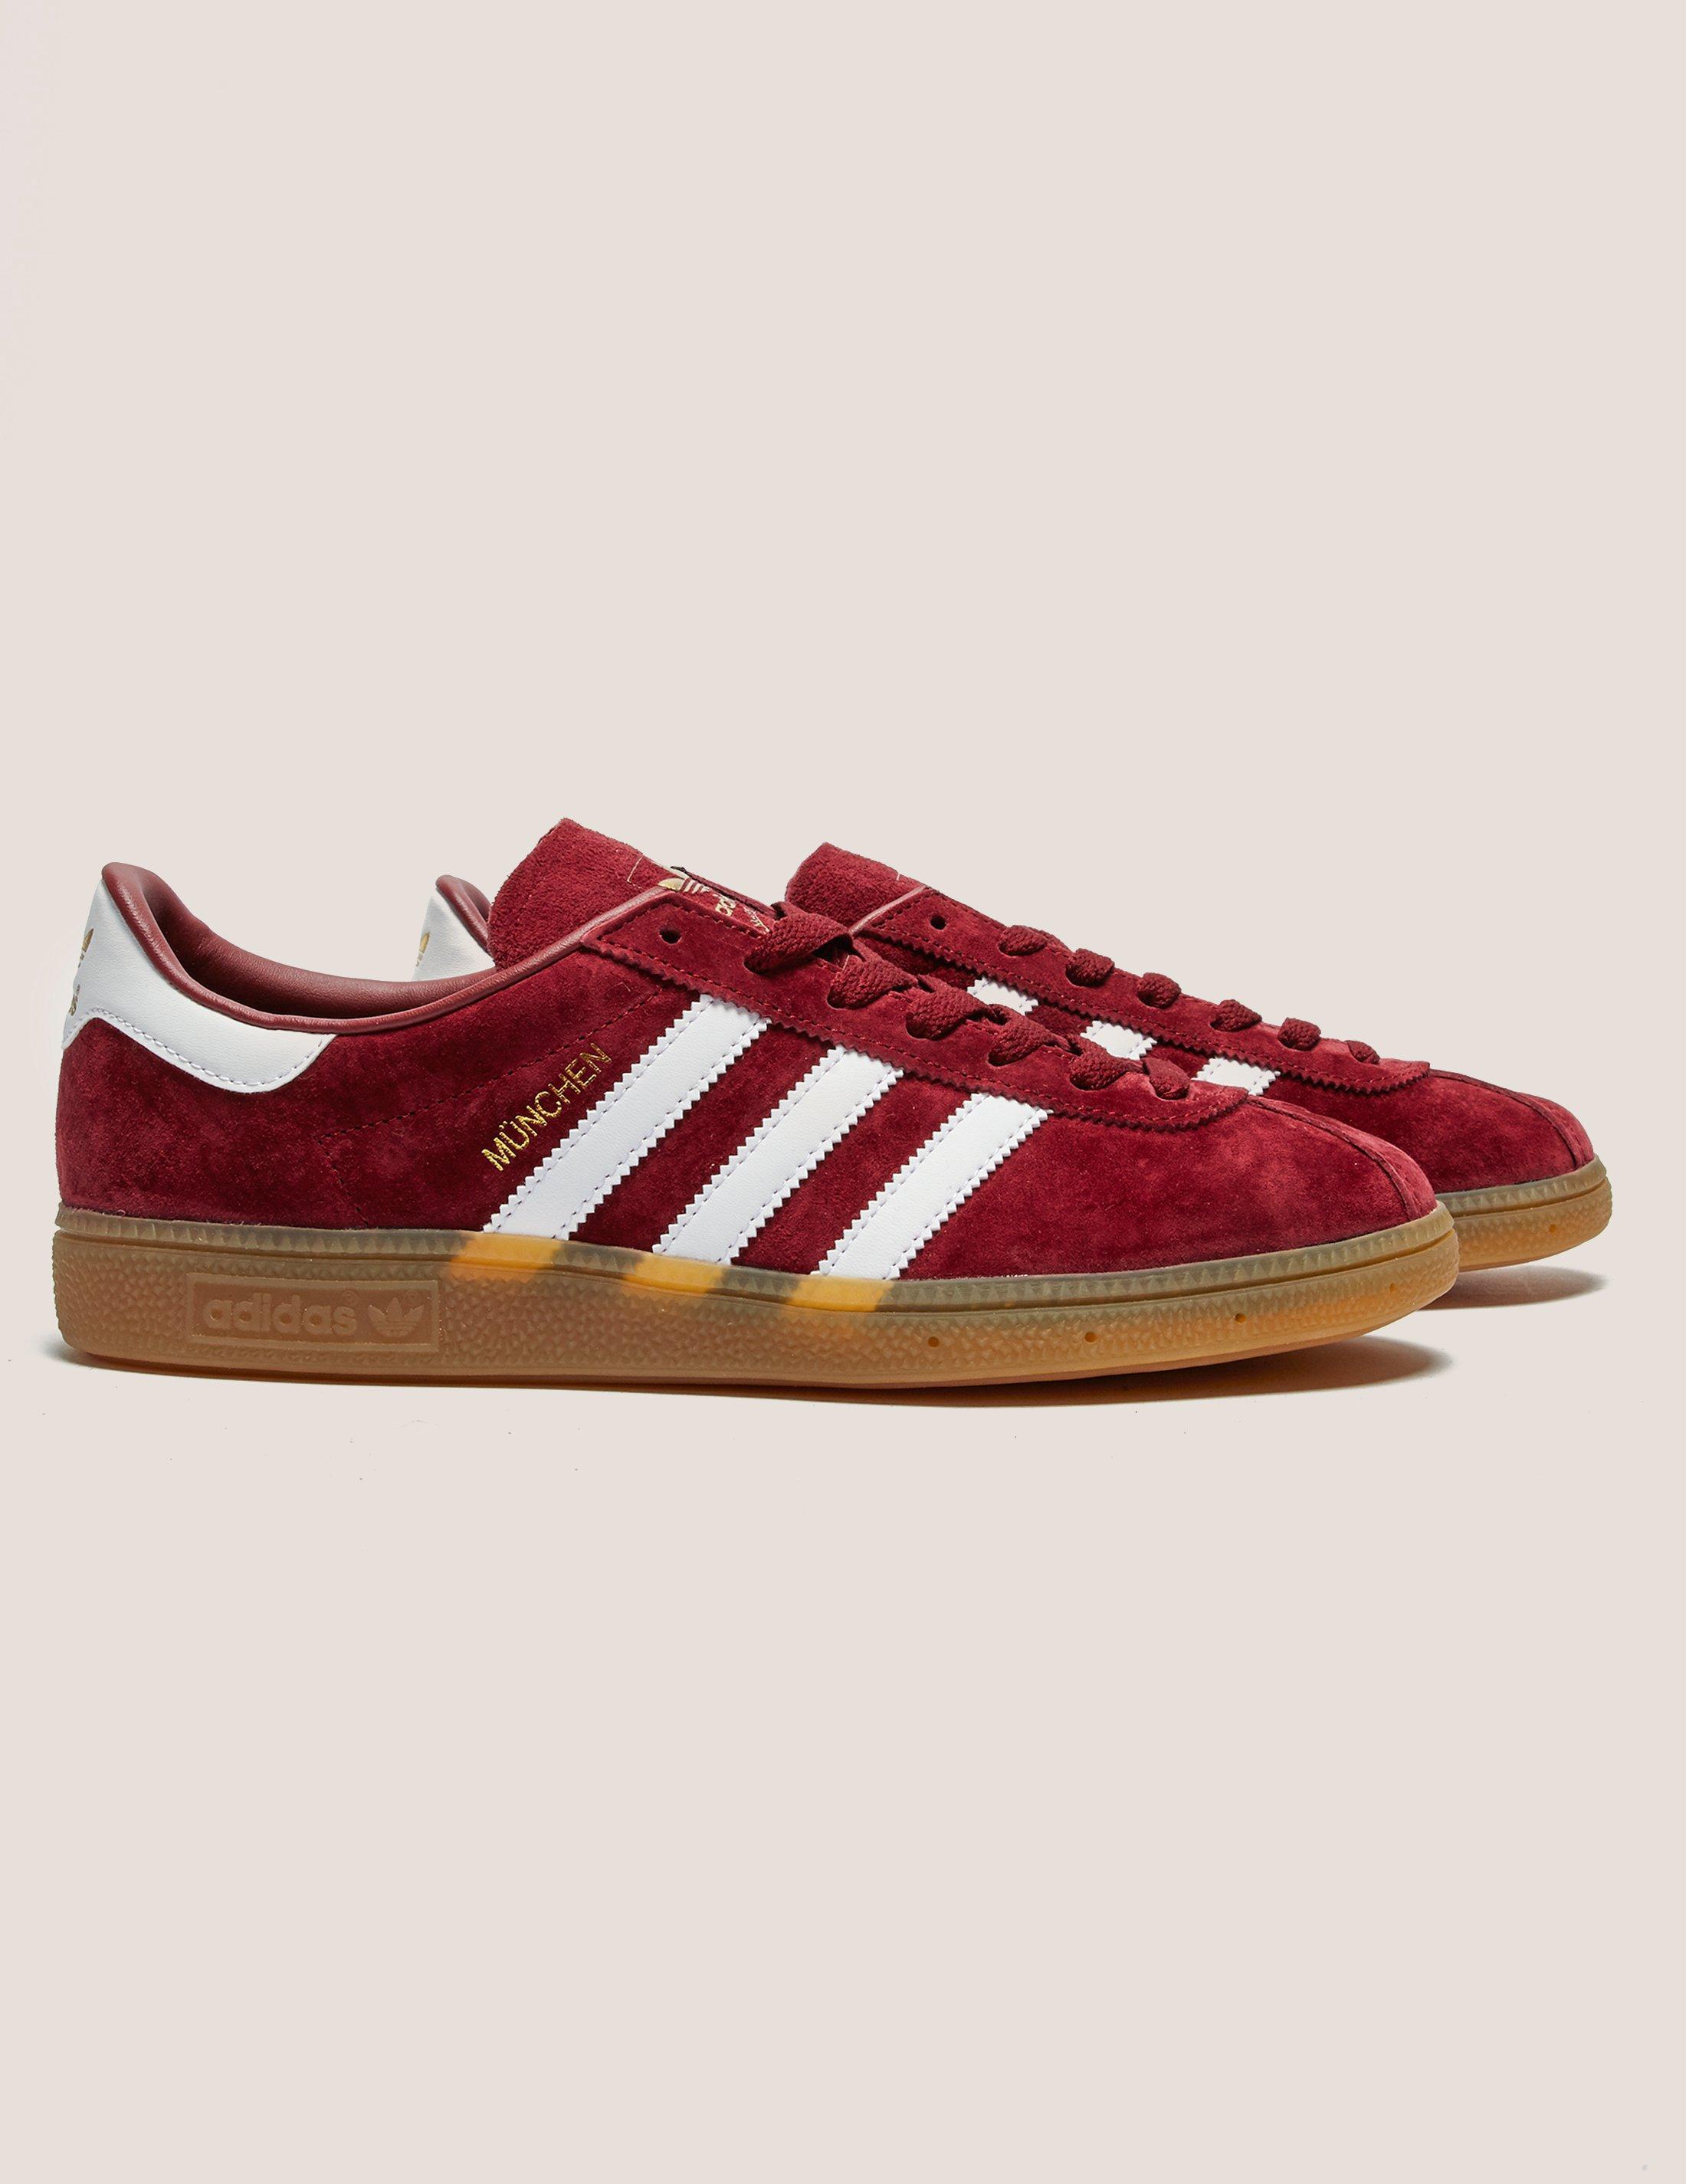 adidas munchen shoes red